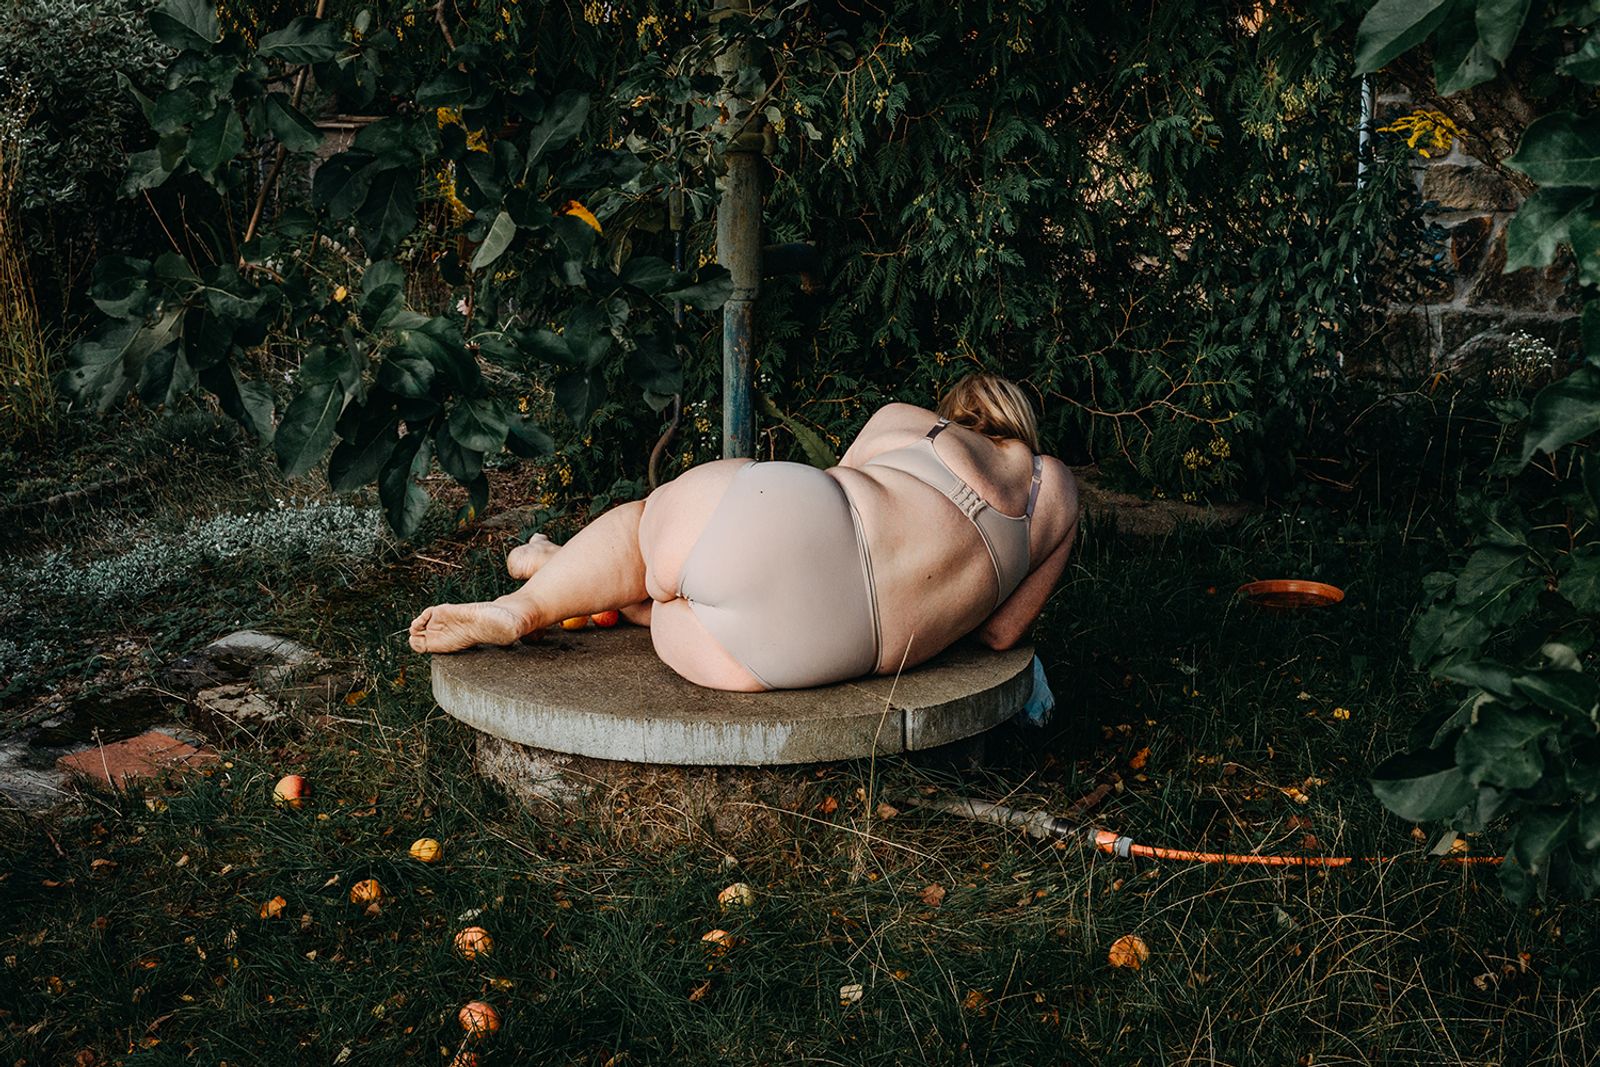 © Jana Plavec - Image from the Garden with Fallen Apples photography project